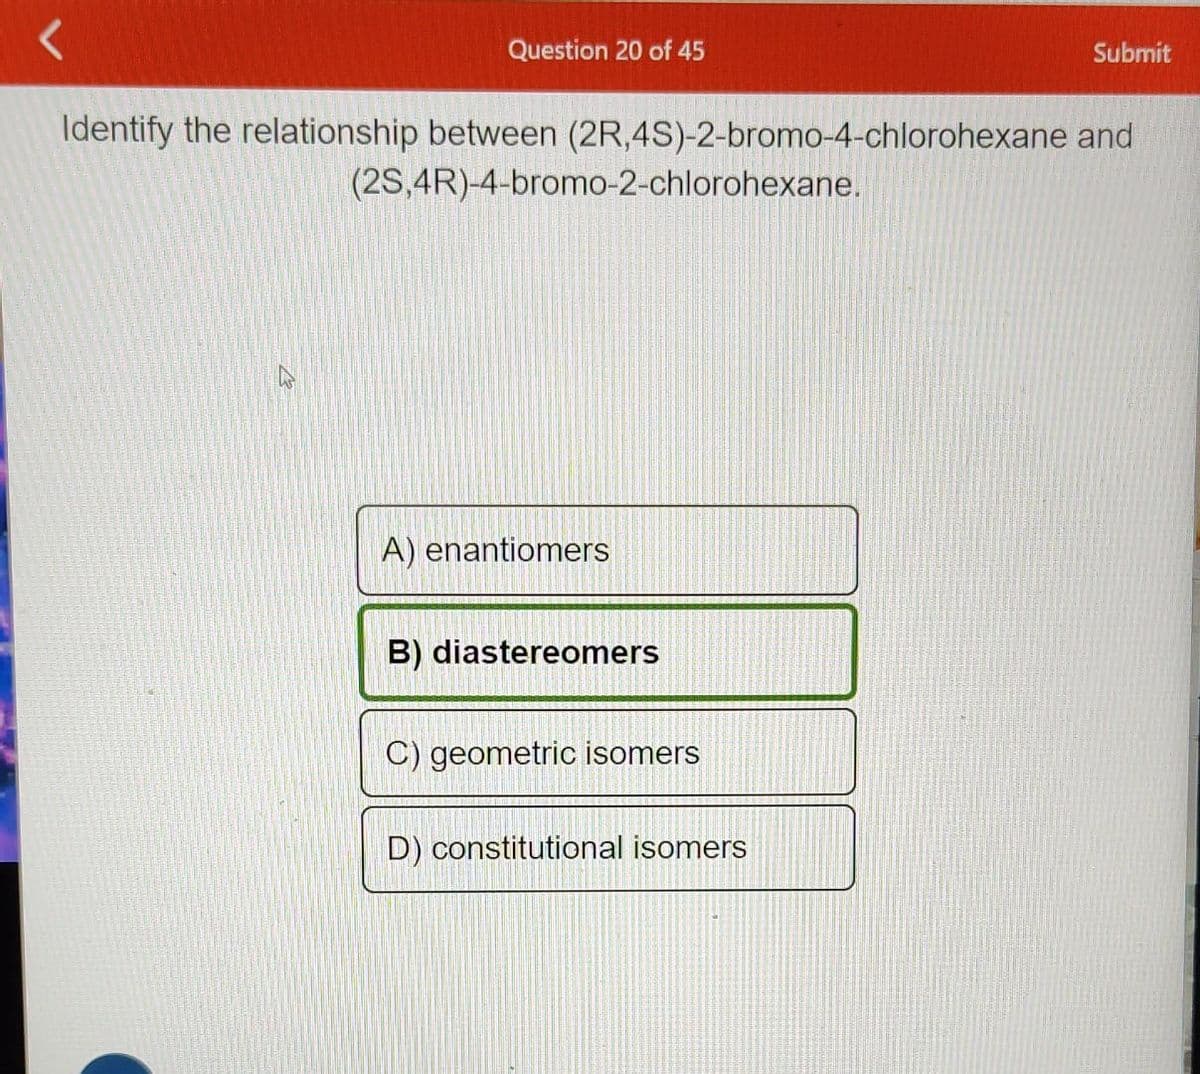 <
Question 20 of 45
Identify the relationship between (2R,4S)-2-bromo-4-chlorohexane and
(2S,4R)-4-bromo-2-chlorohexane.
A) enantiomers
B) diastereomers
C) geometric isomers
Submit
D) constitutional isomers